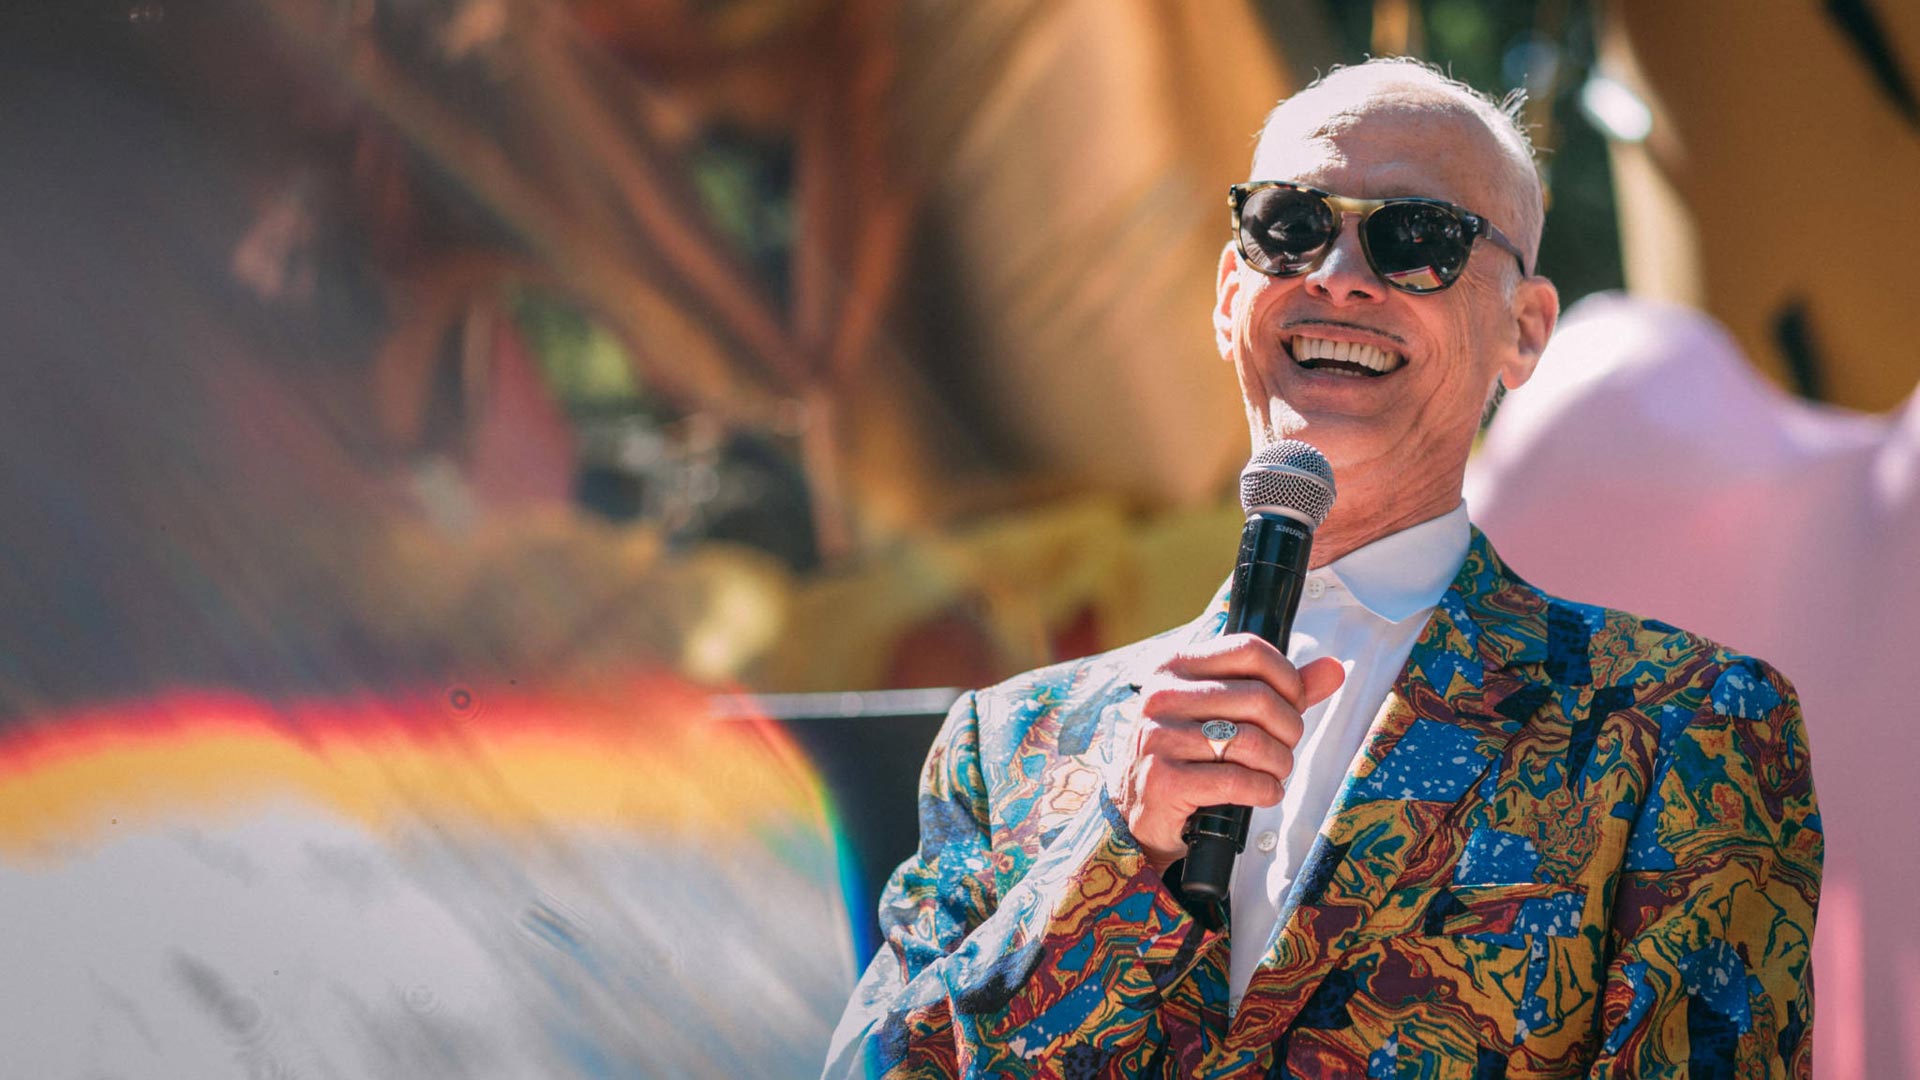 John Waters has hosted the Burger Boogaloo music festival in Oakland every year since 2015.